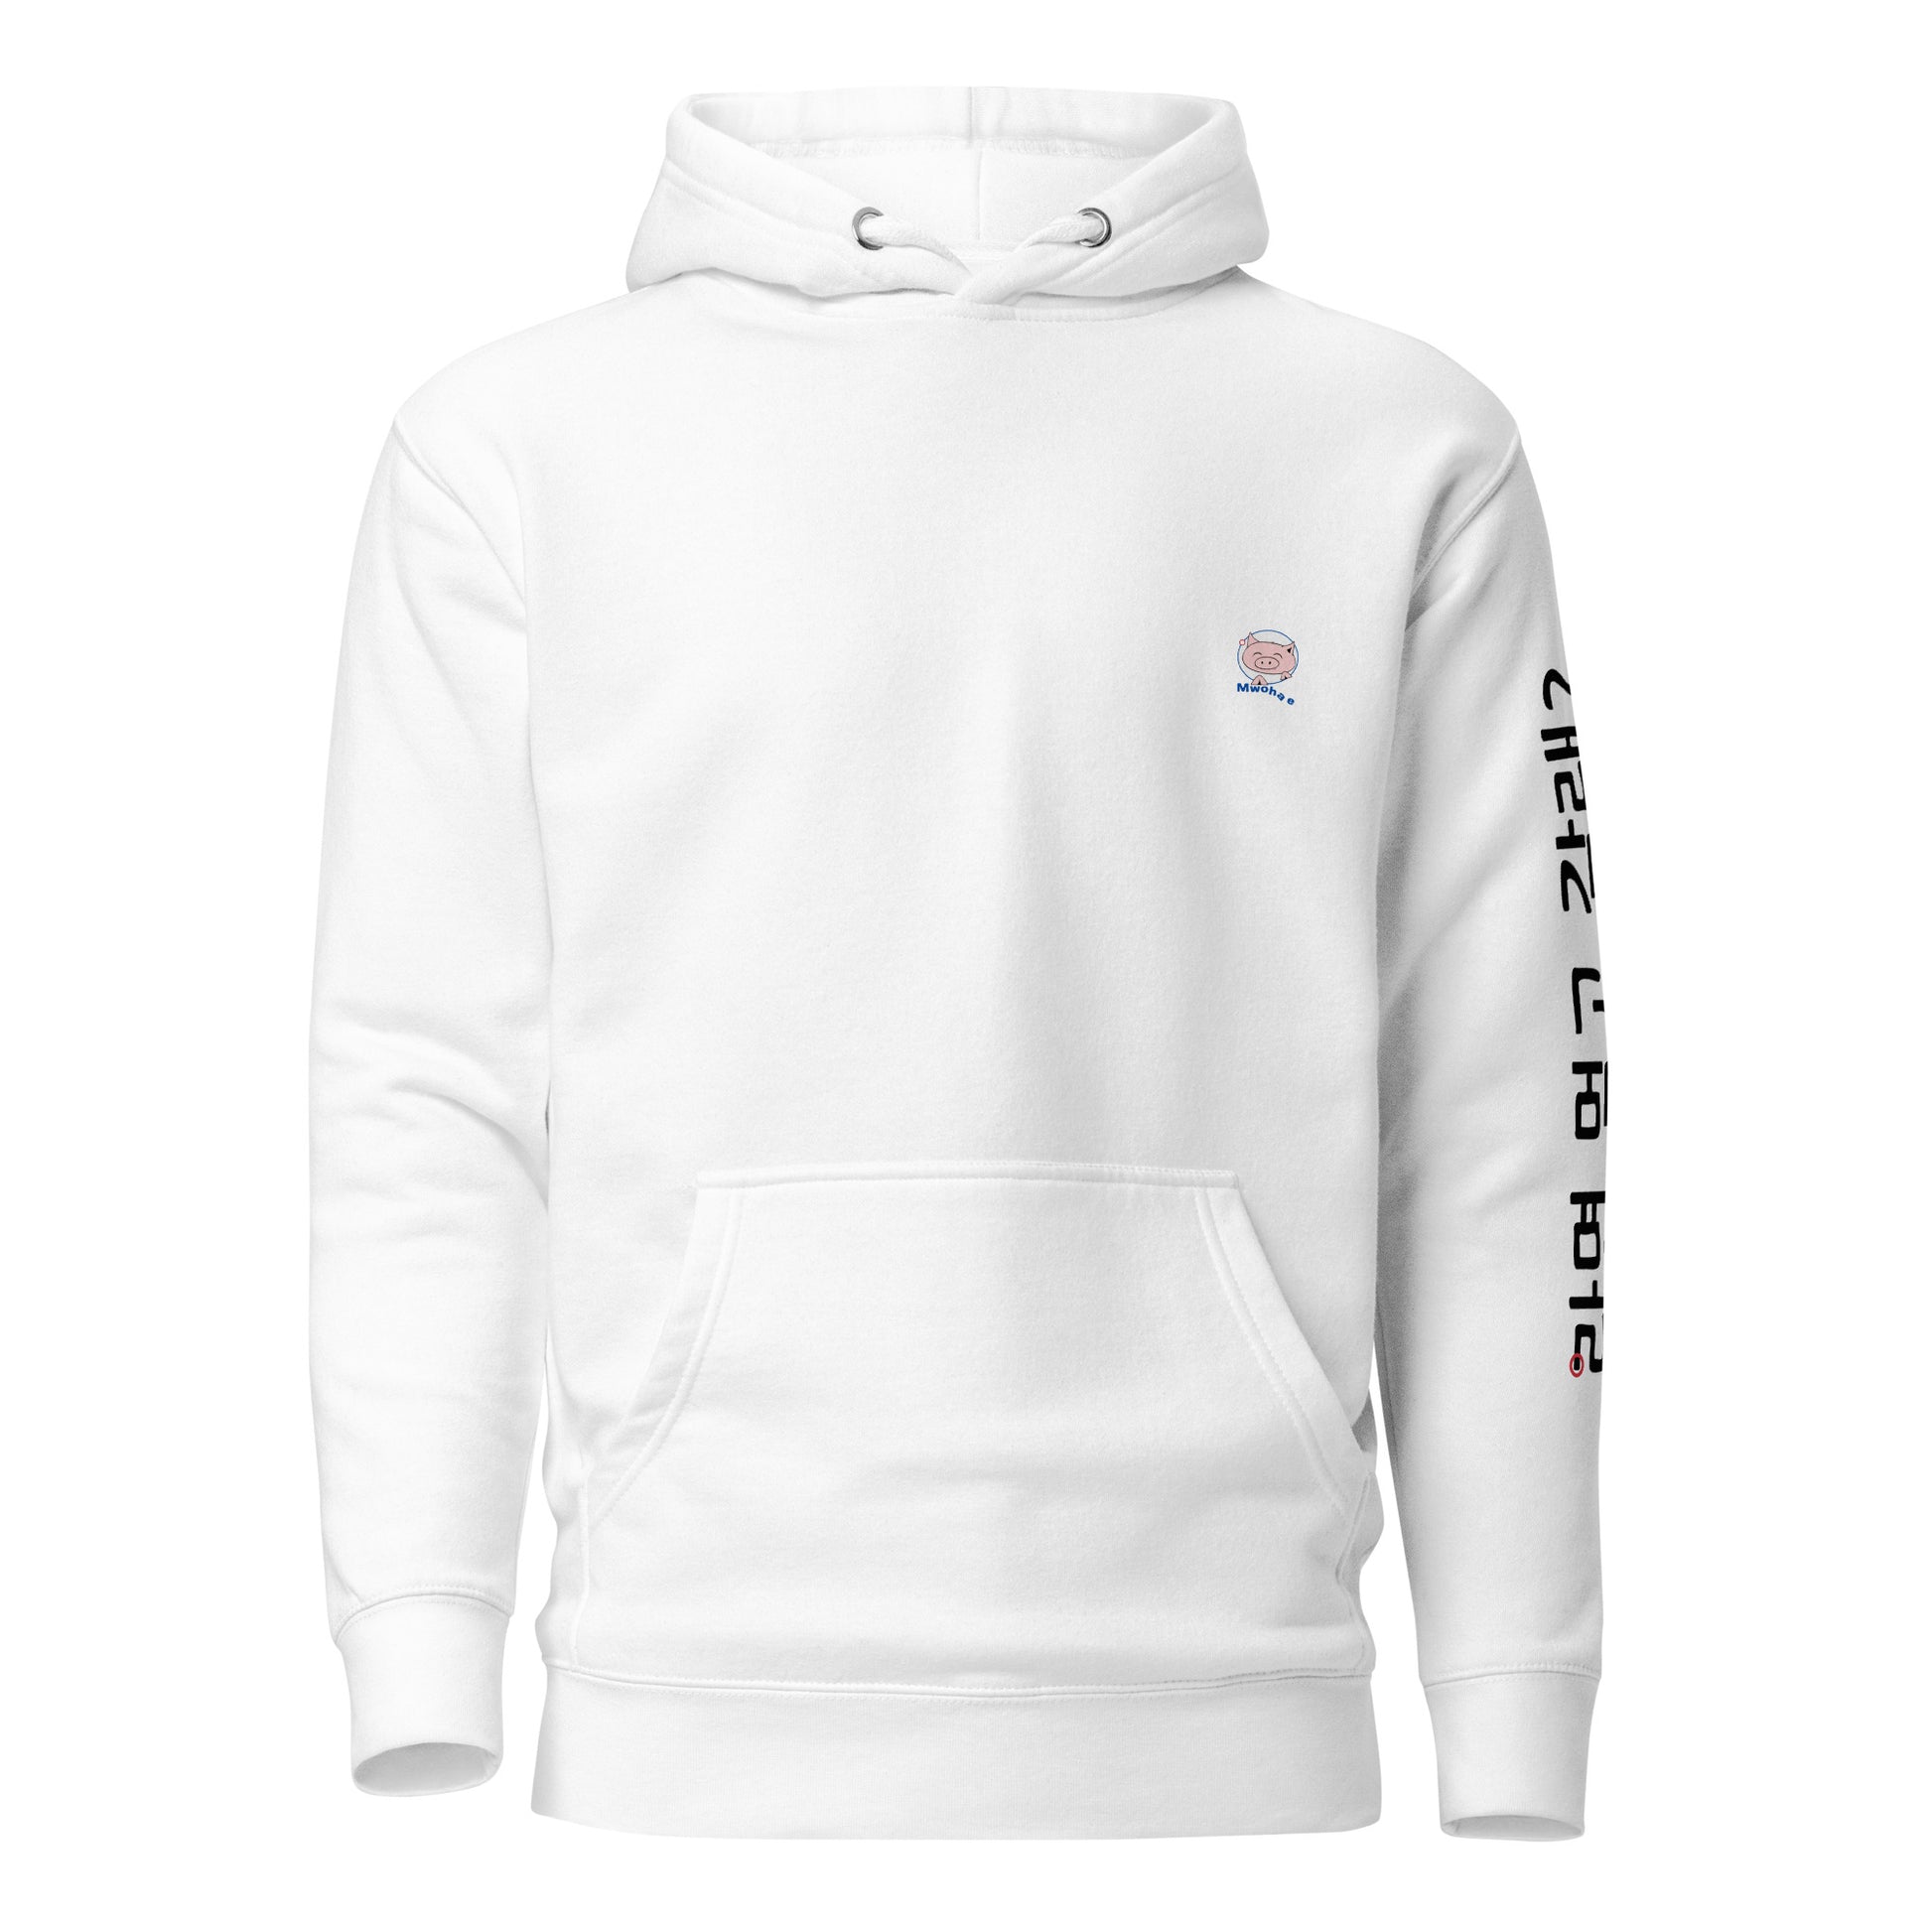 White hoodie with small Mwohae logo on left chest